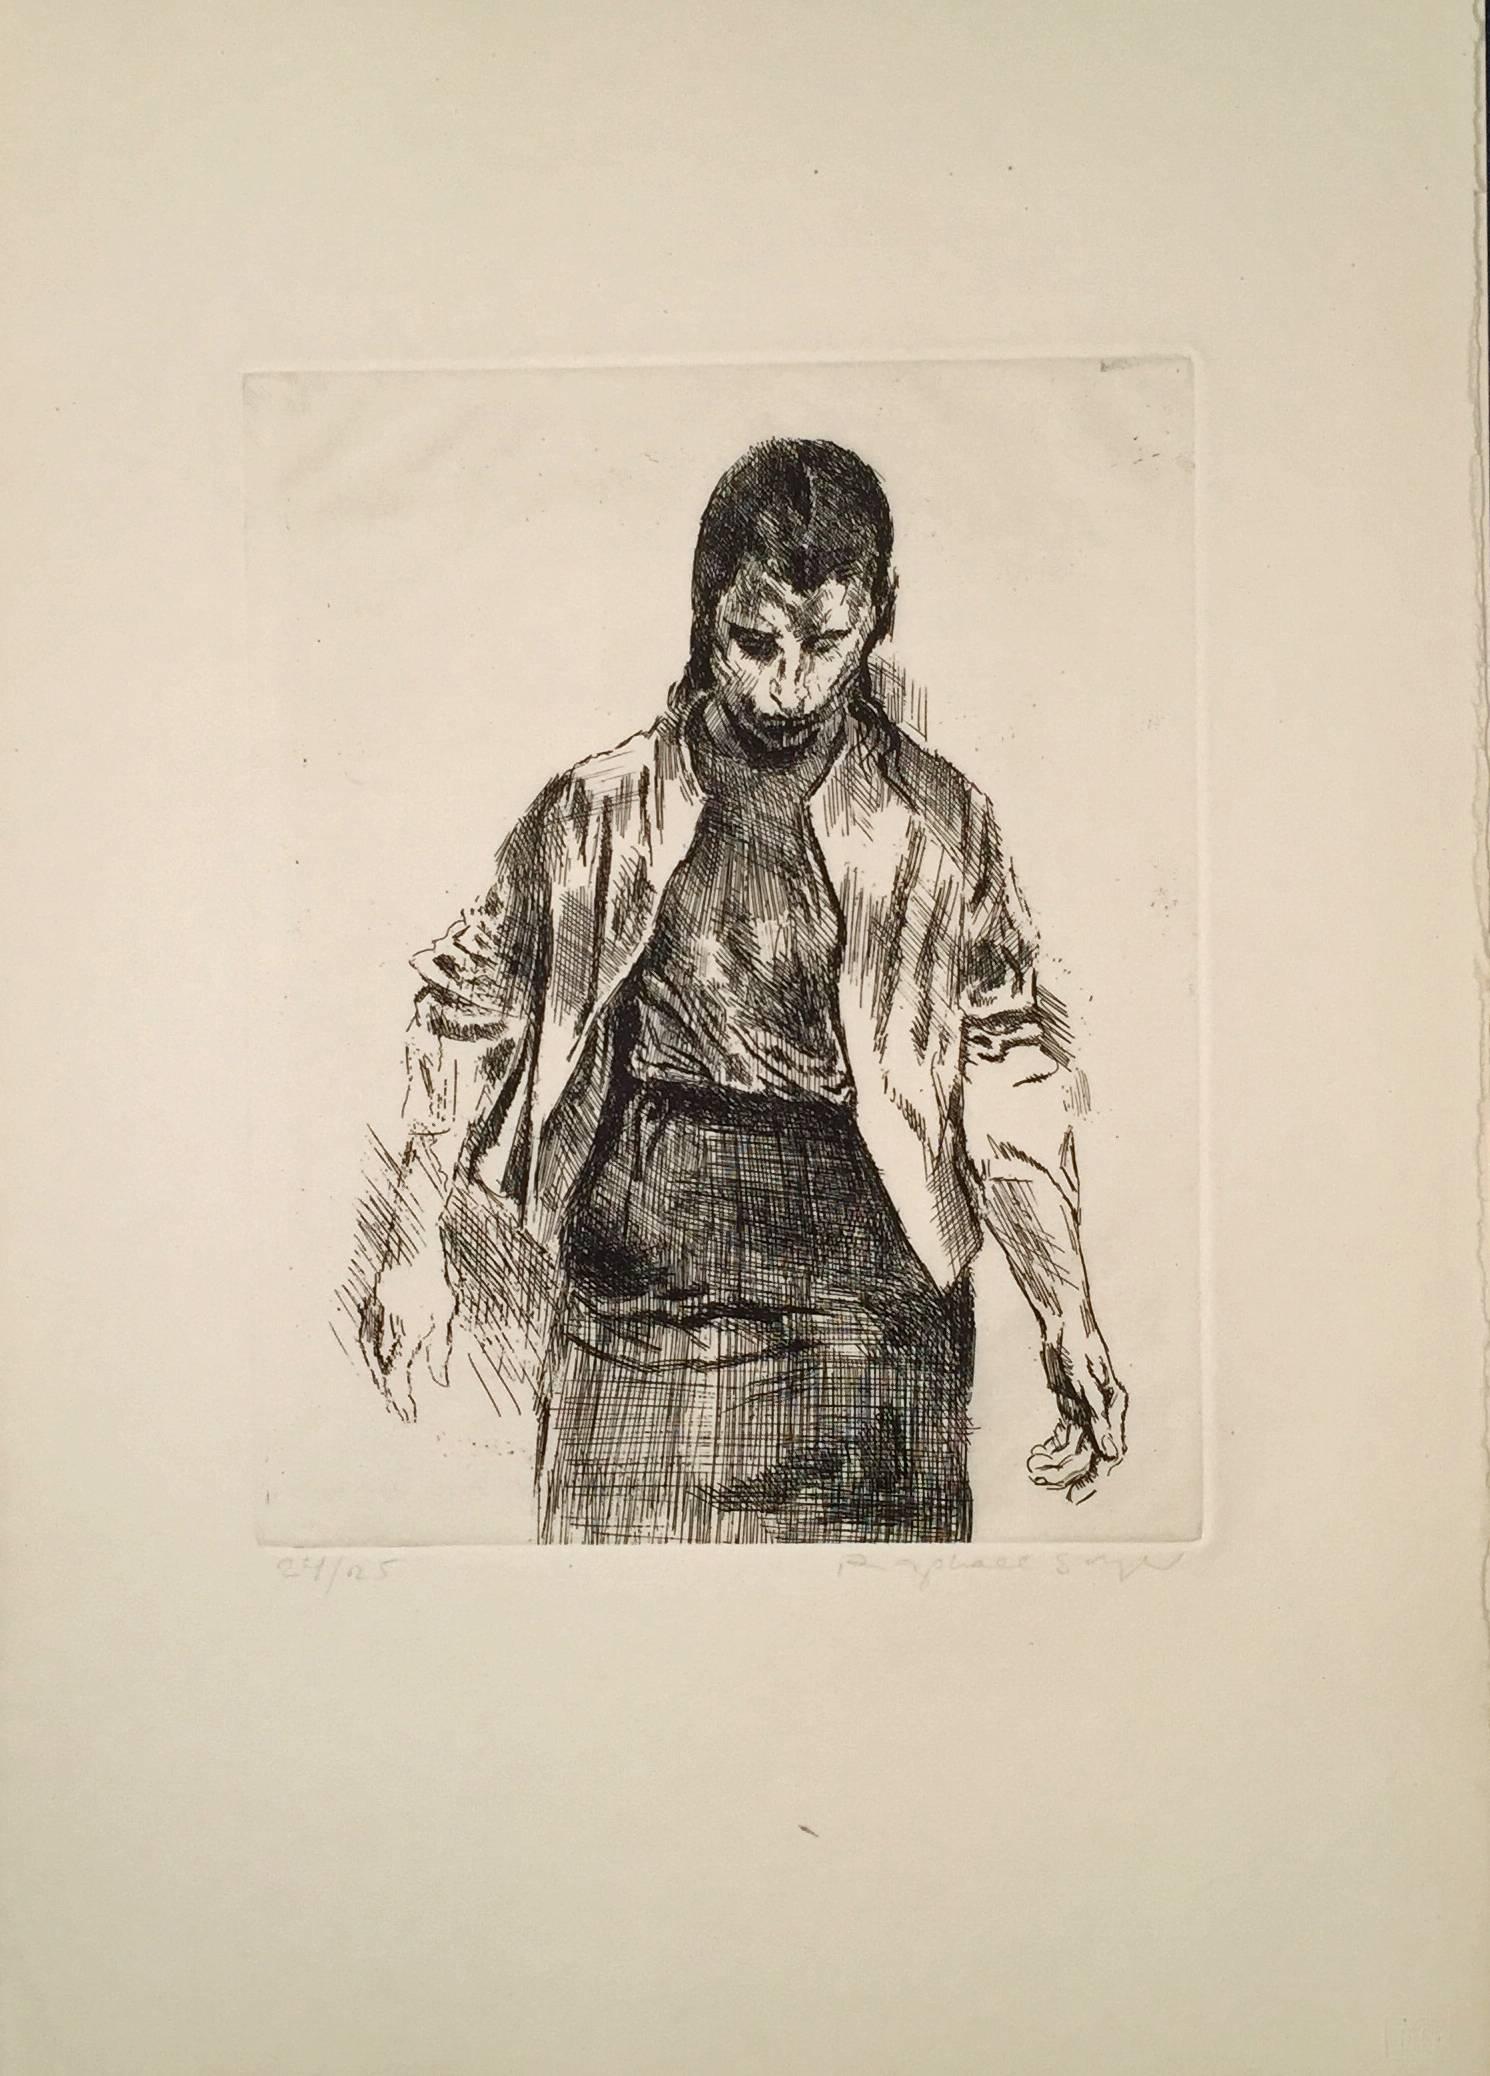 SIXTEEN ETCHINGS - Print by Raphael Soyer